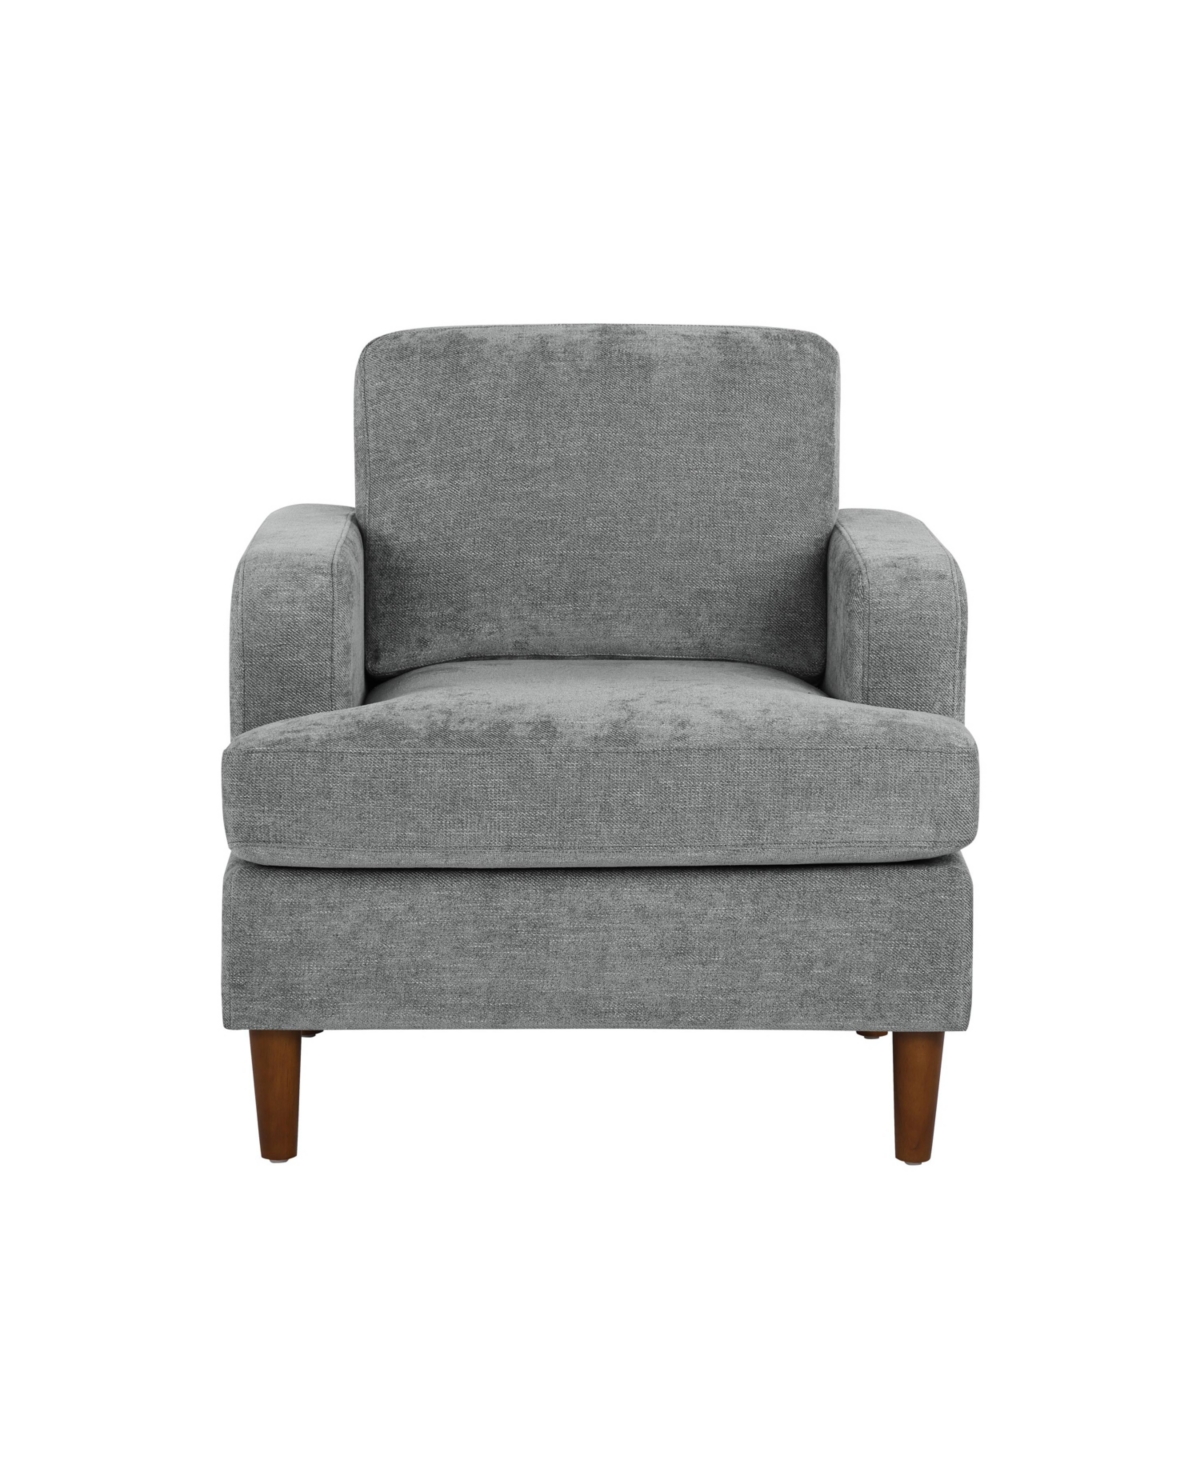 Serta 32.7" Polyester Benito Accent Chair In Light Gray